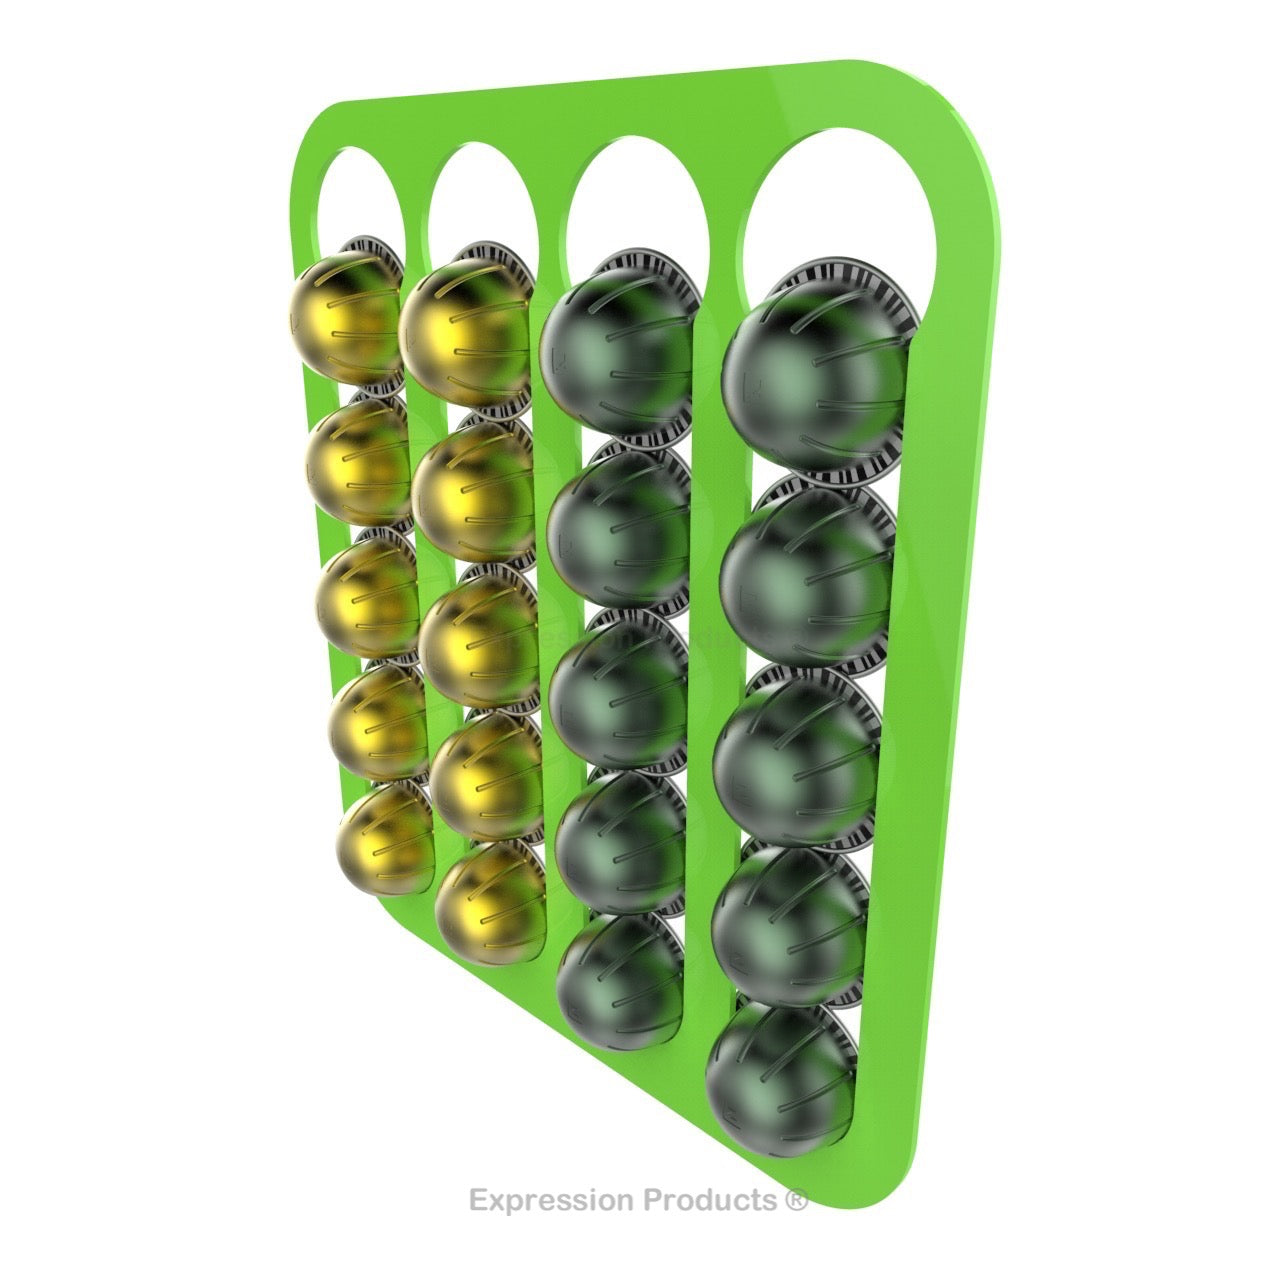 Magnetic Nespresso Vertuo capsule holder shown in lime holding 20 pods